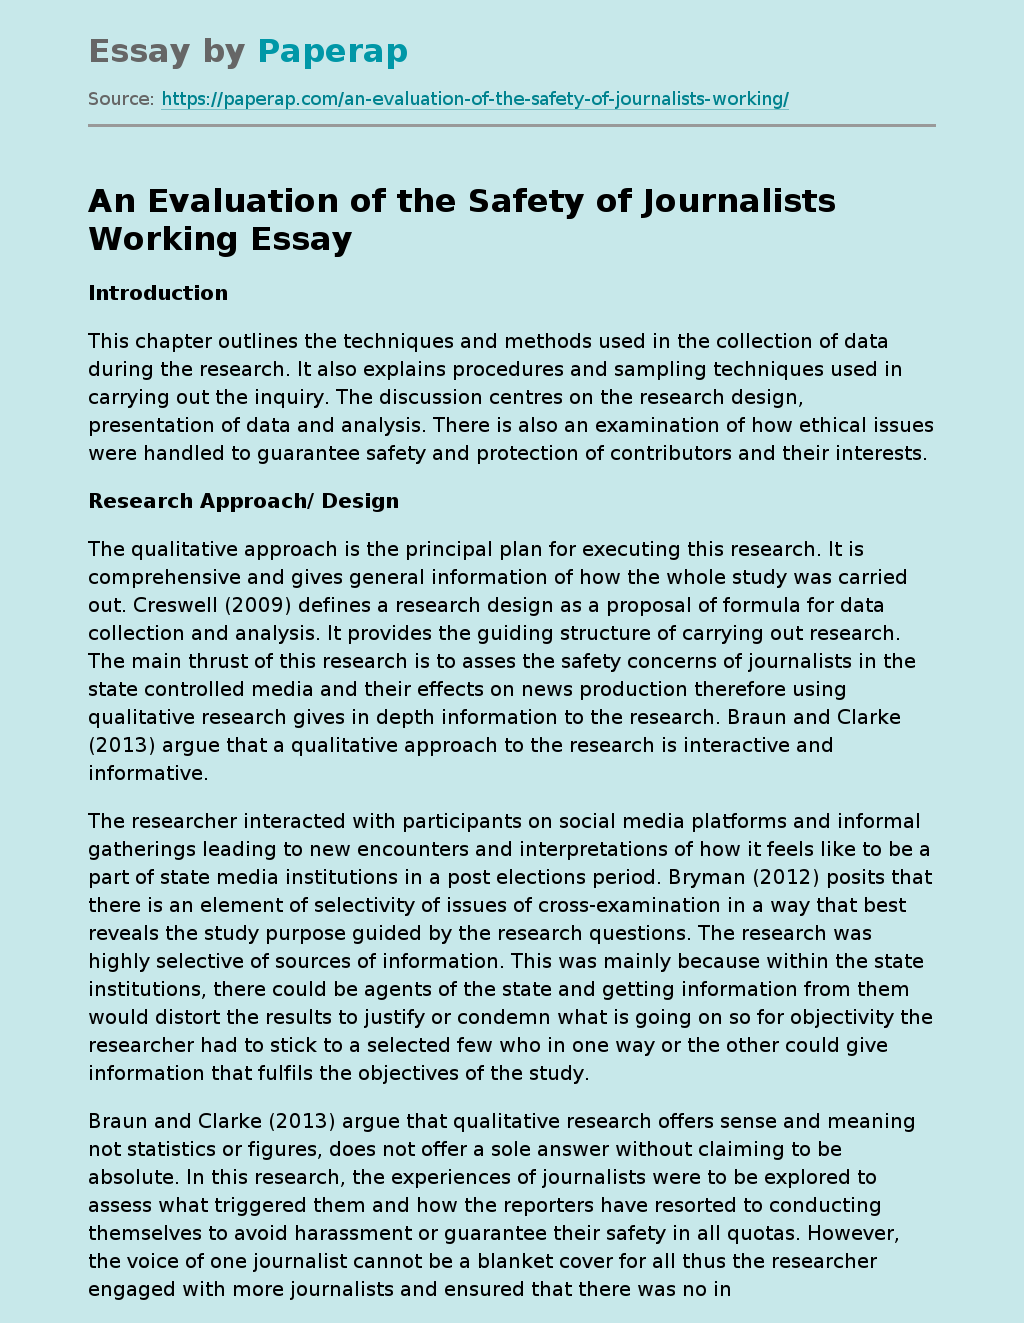 An Evaluation of the Safety of Journalists Working